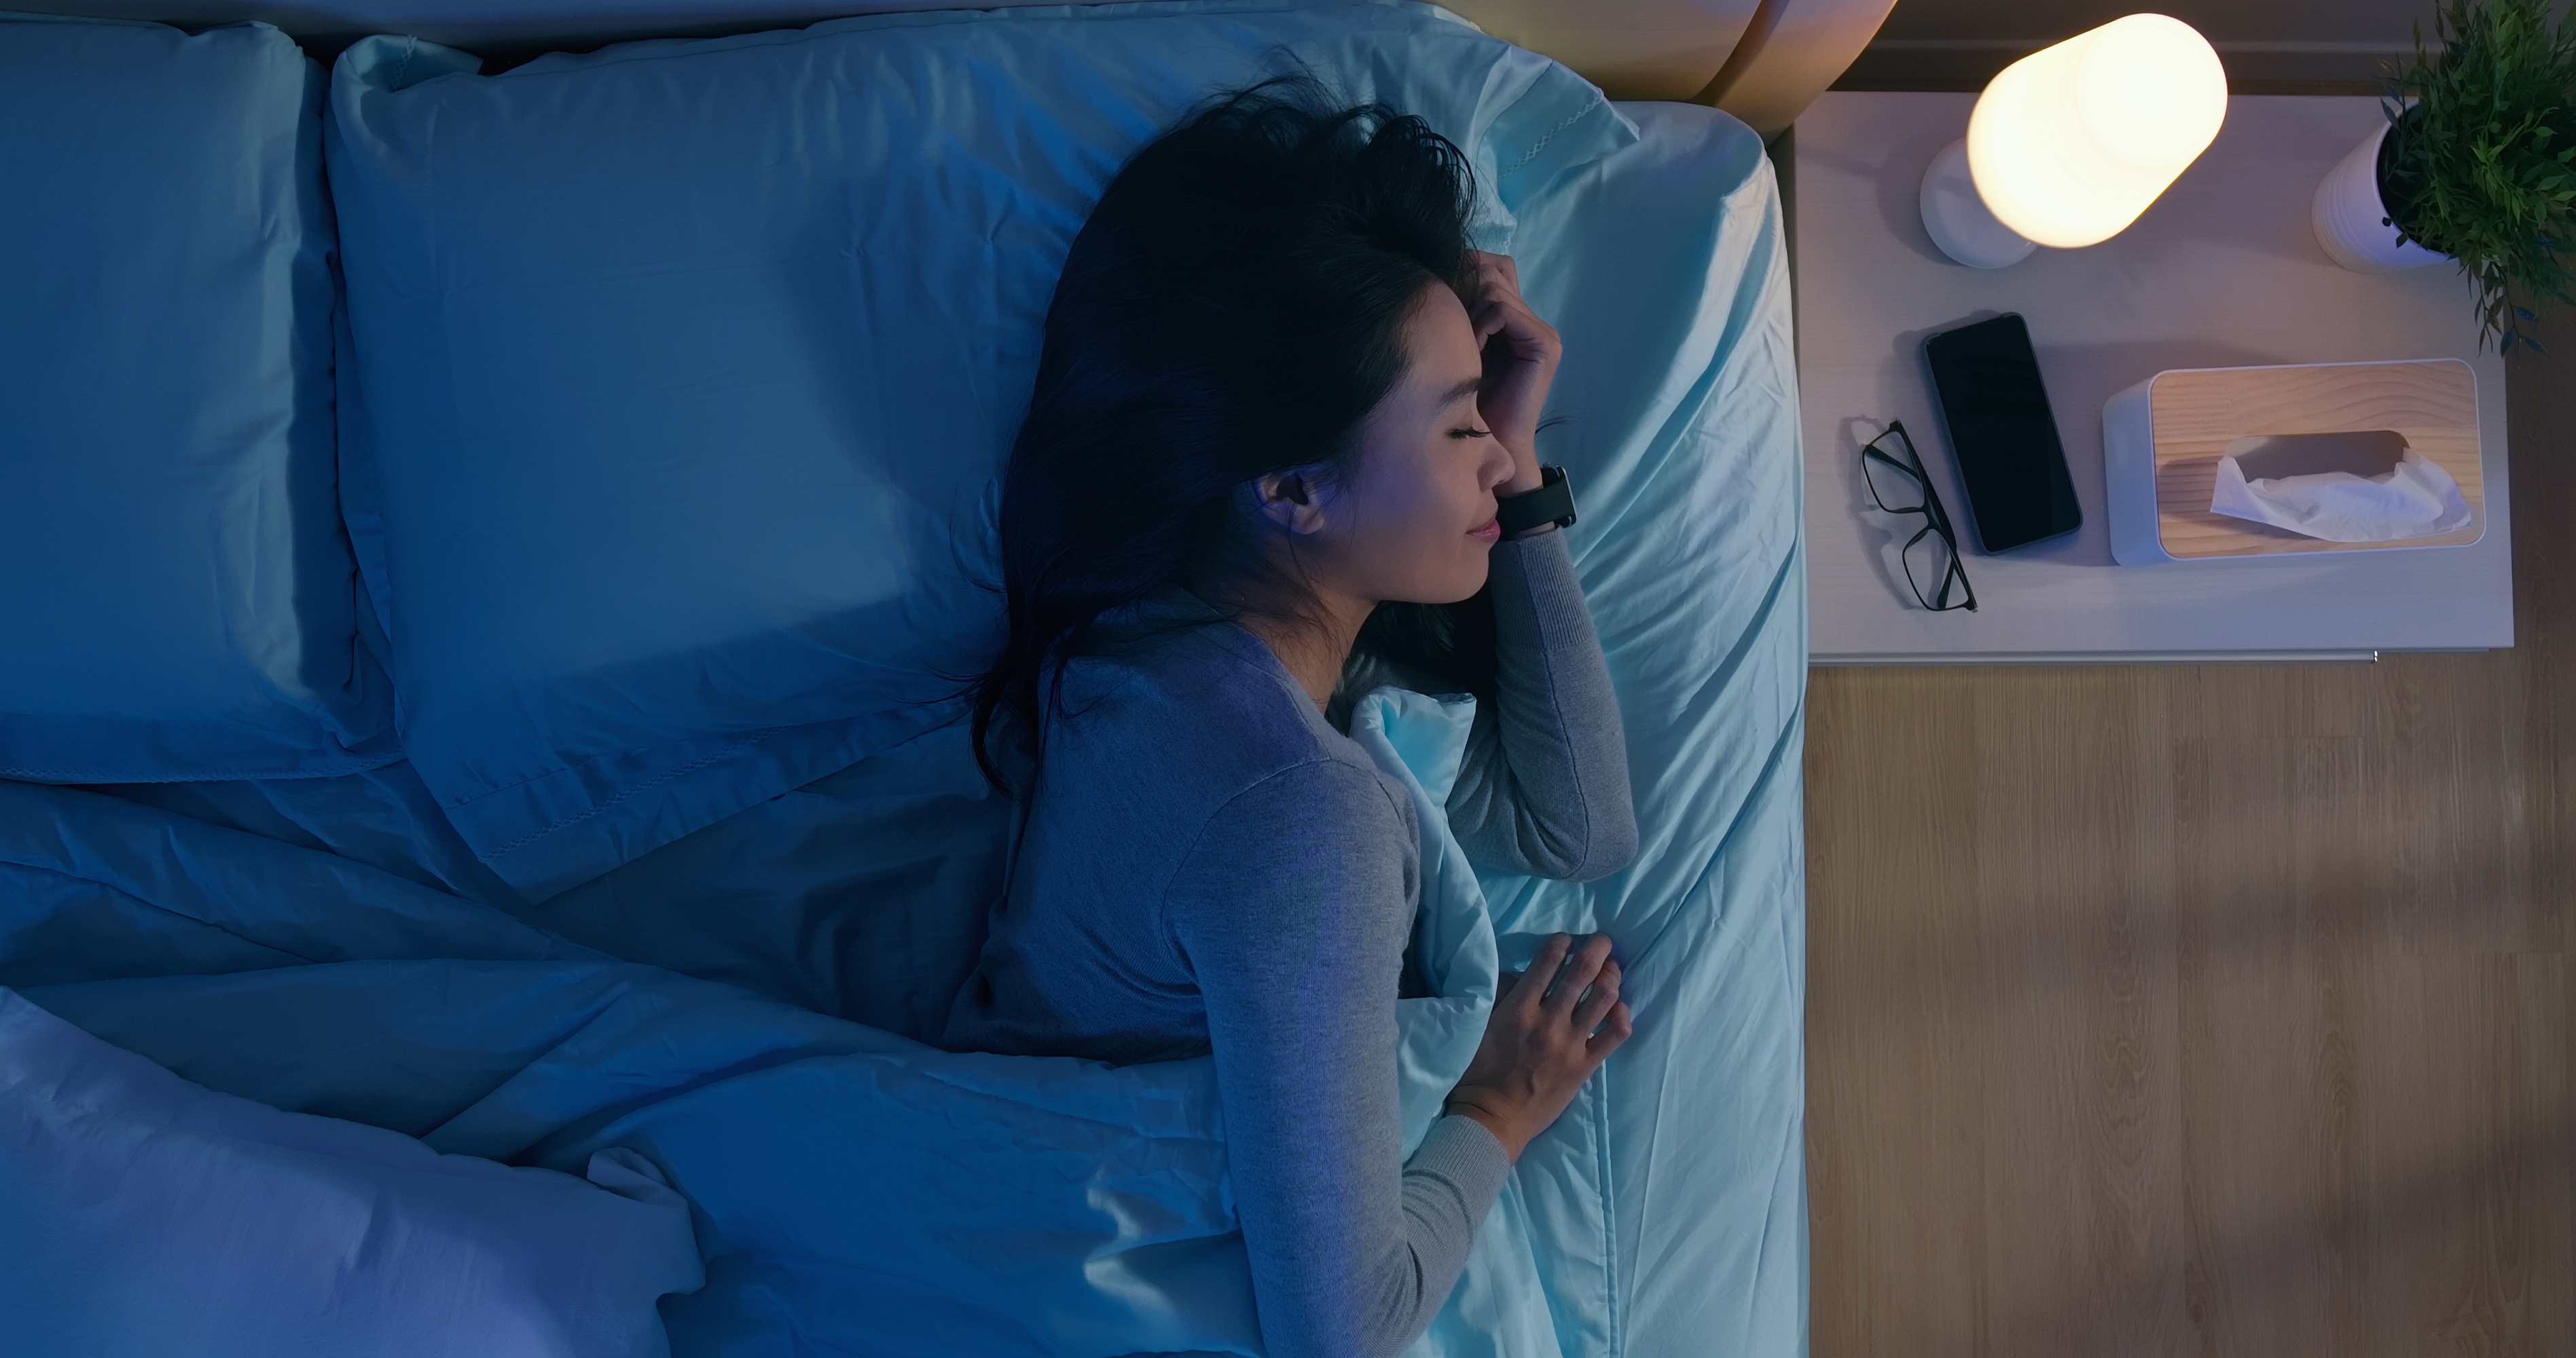 Overhead view of a woman sleeping in bed with a smartwatch on her wrist and a phone and light on the nightstand